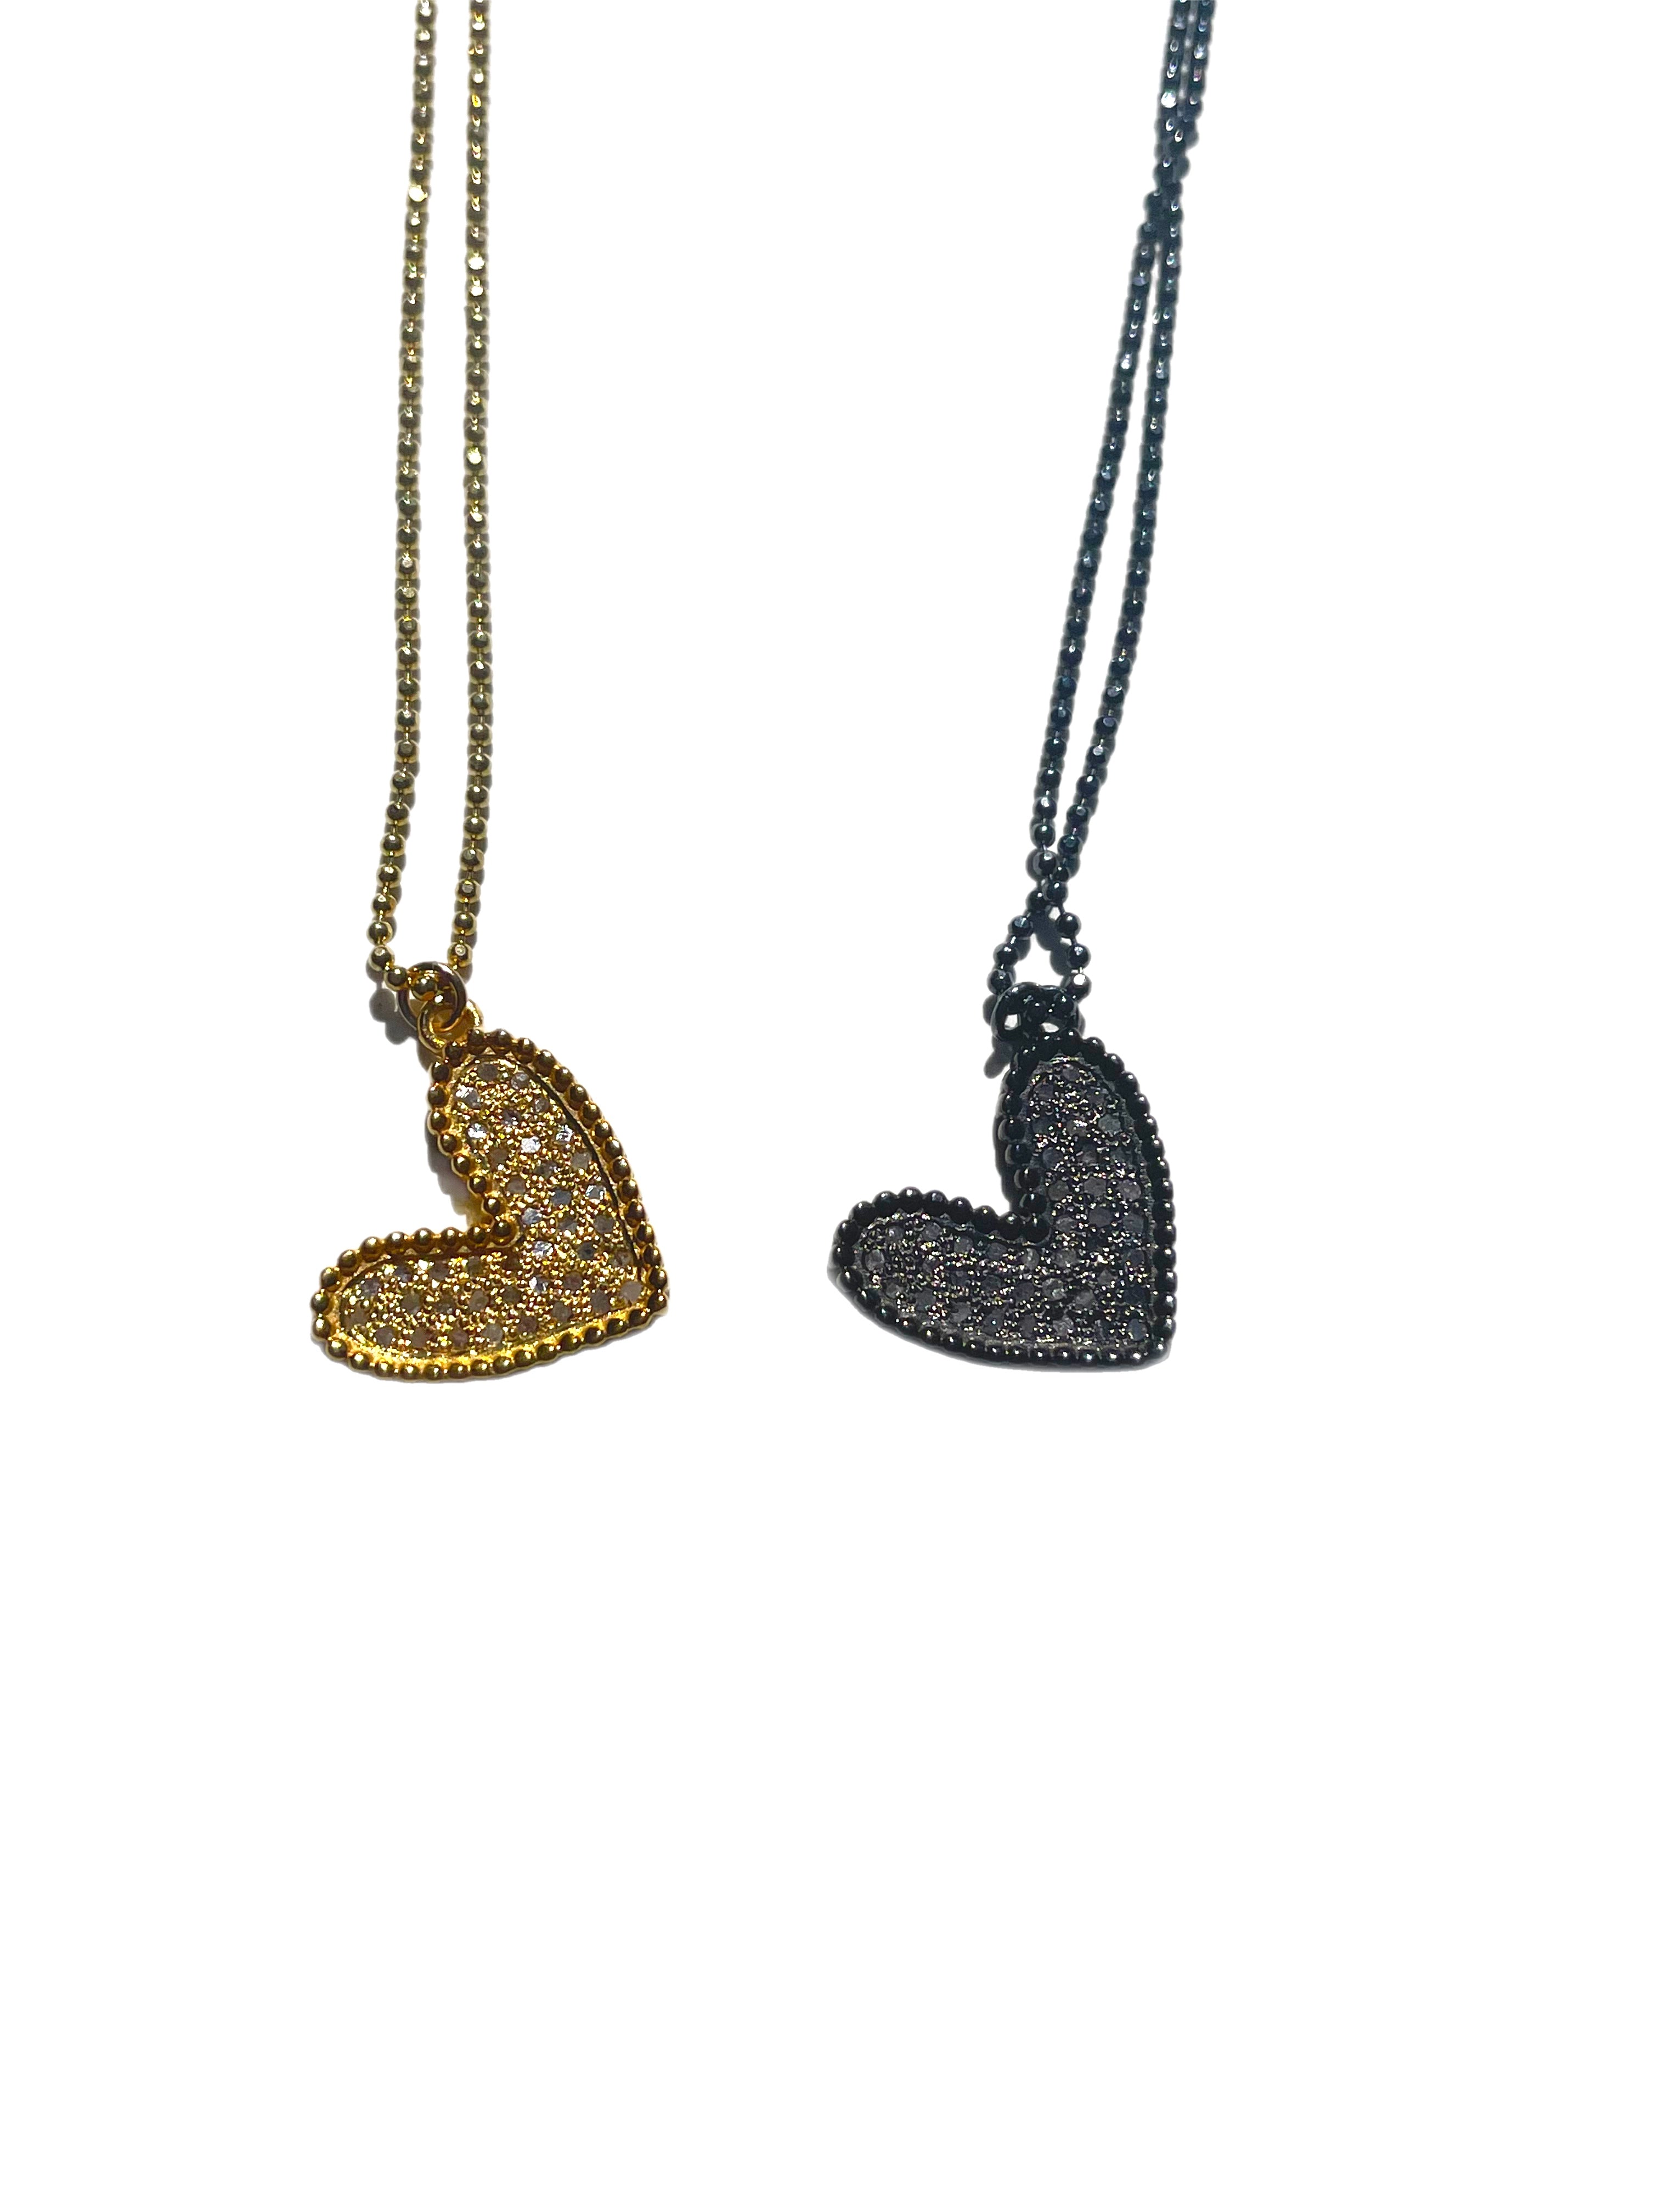 Heart – sterling silver necklace with pave diamond heart pendant